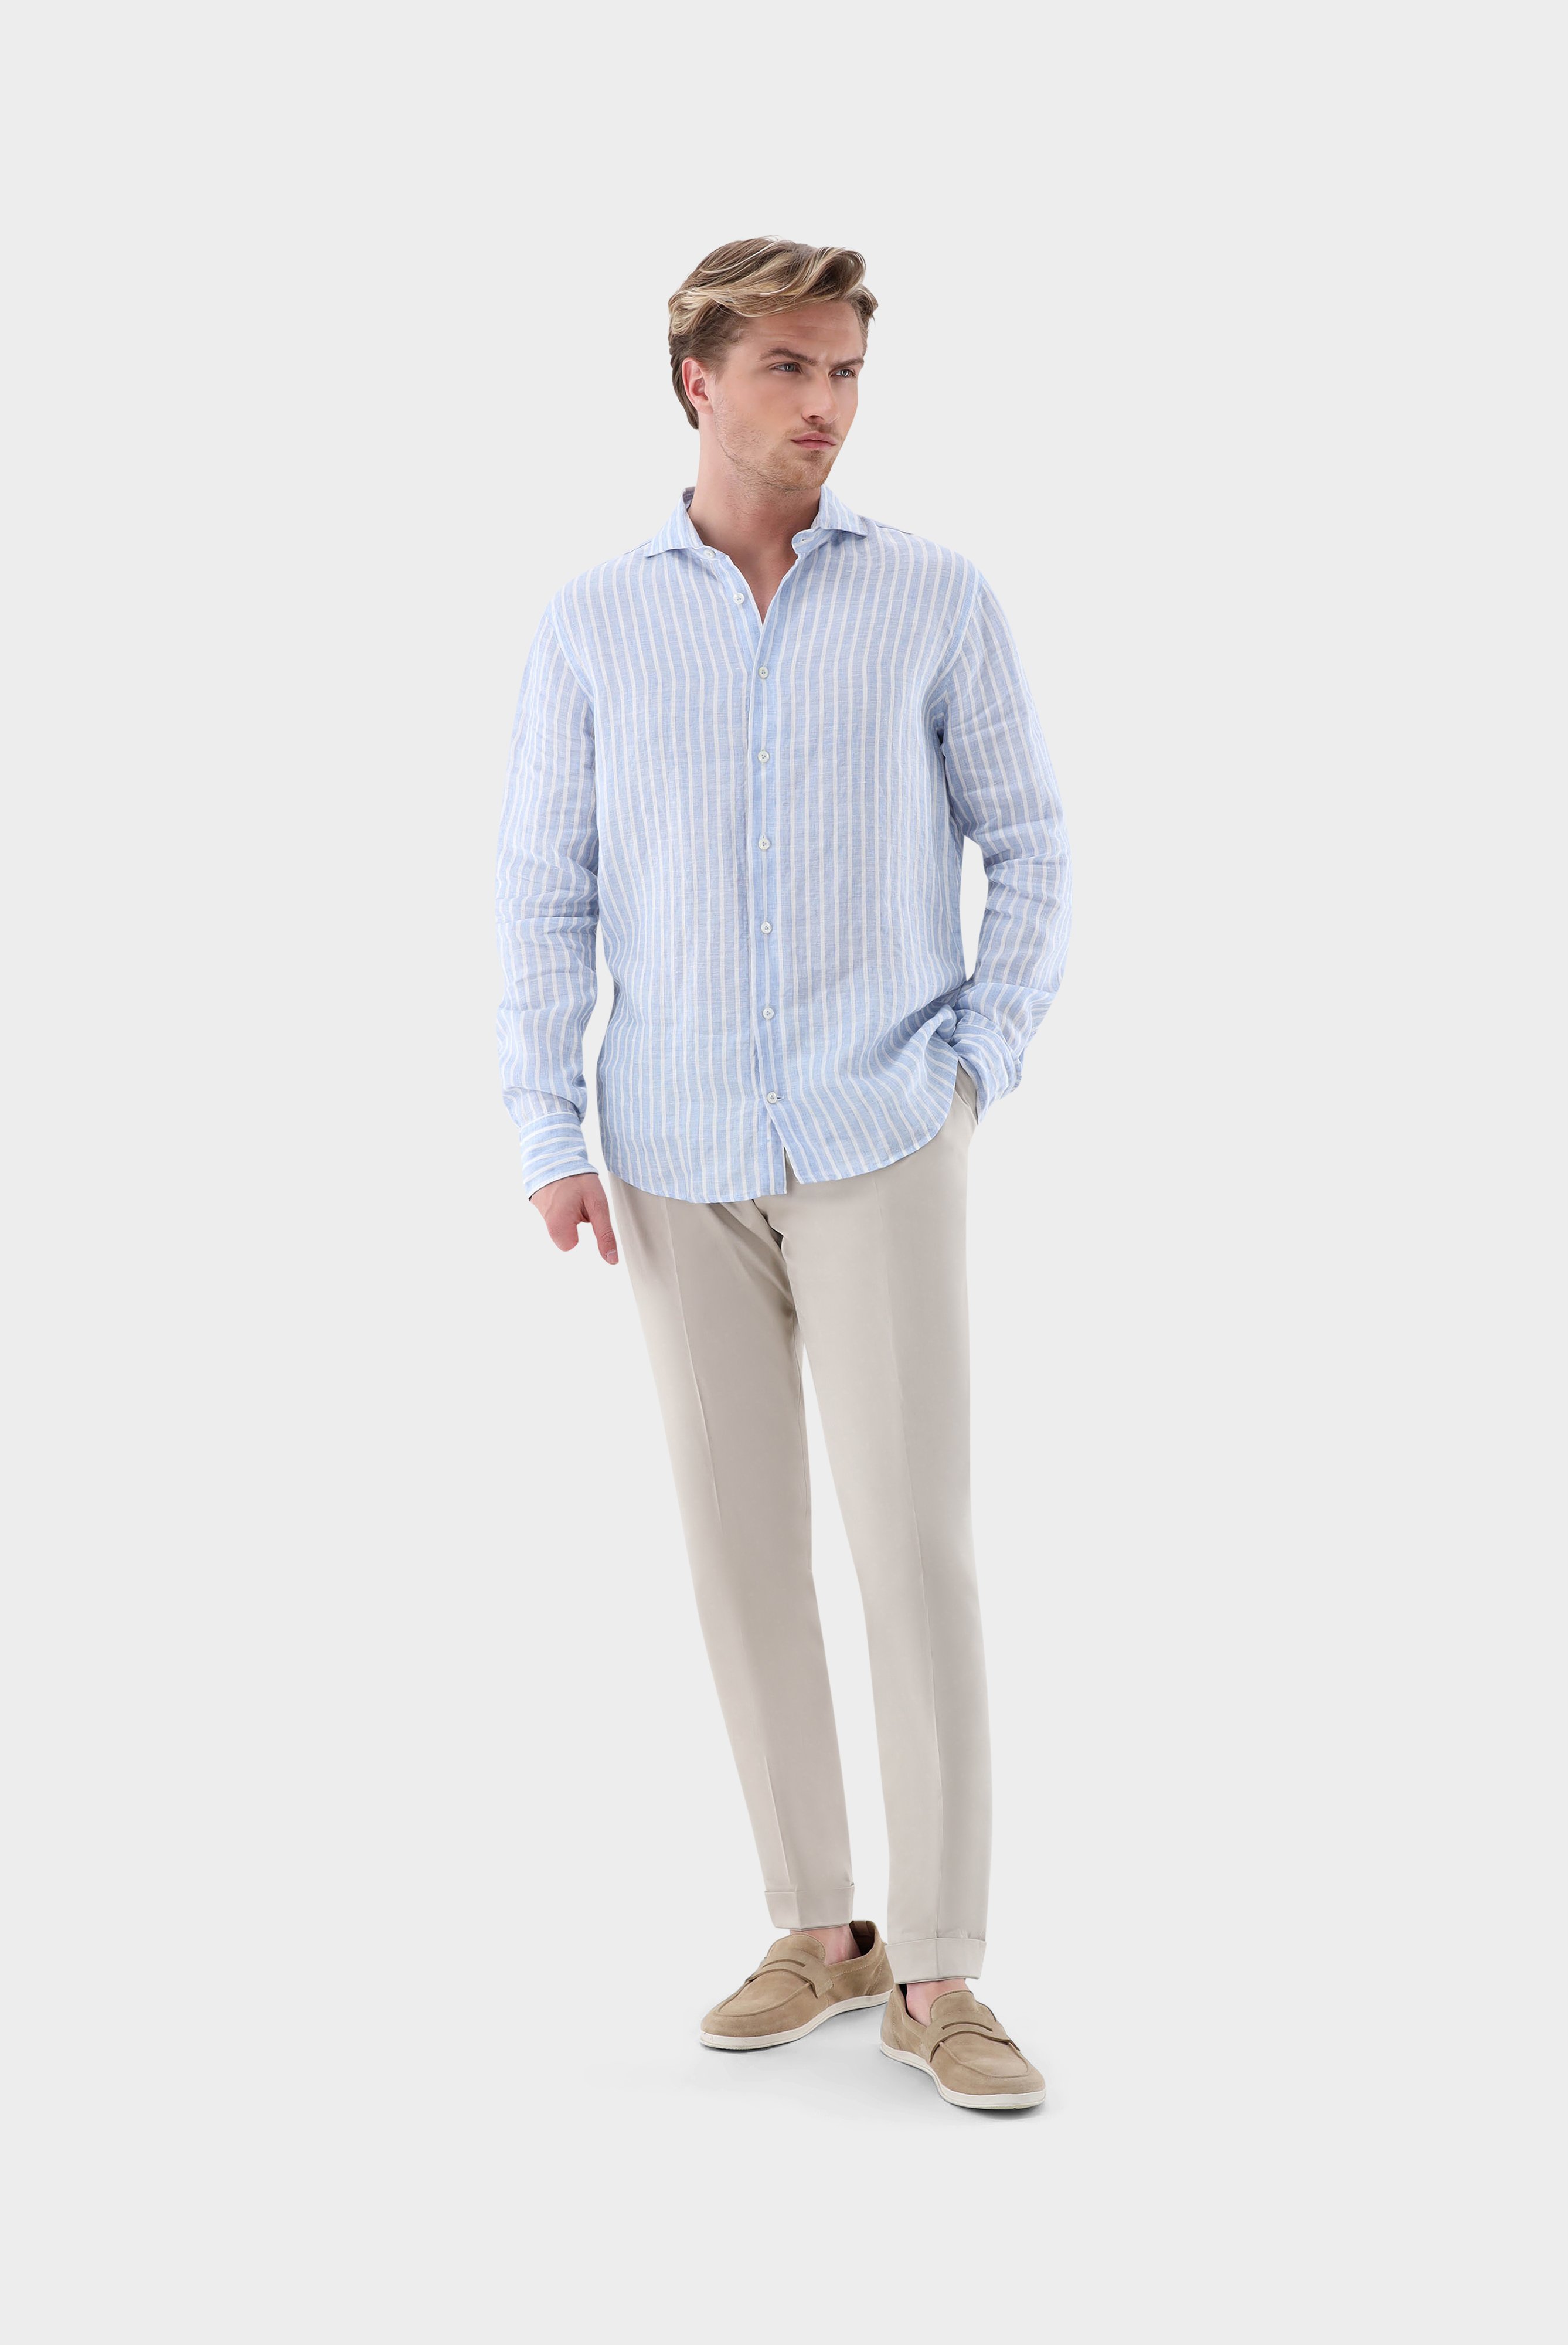 Casual Shirts+Linen Dobby Striped Shirt Tailor Fit+20.2016.9V.156441.730.39